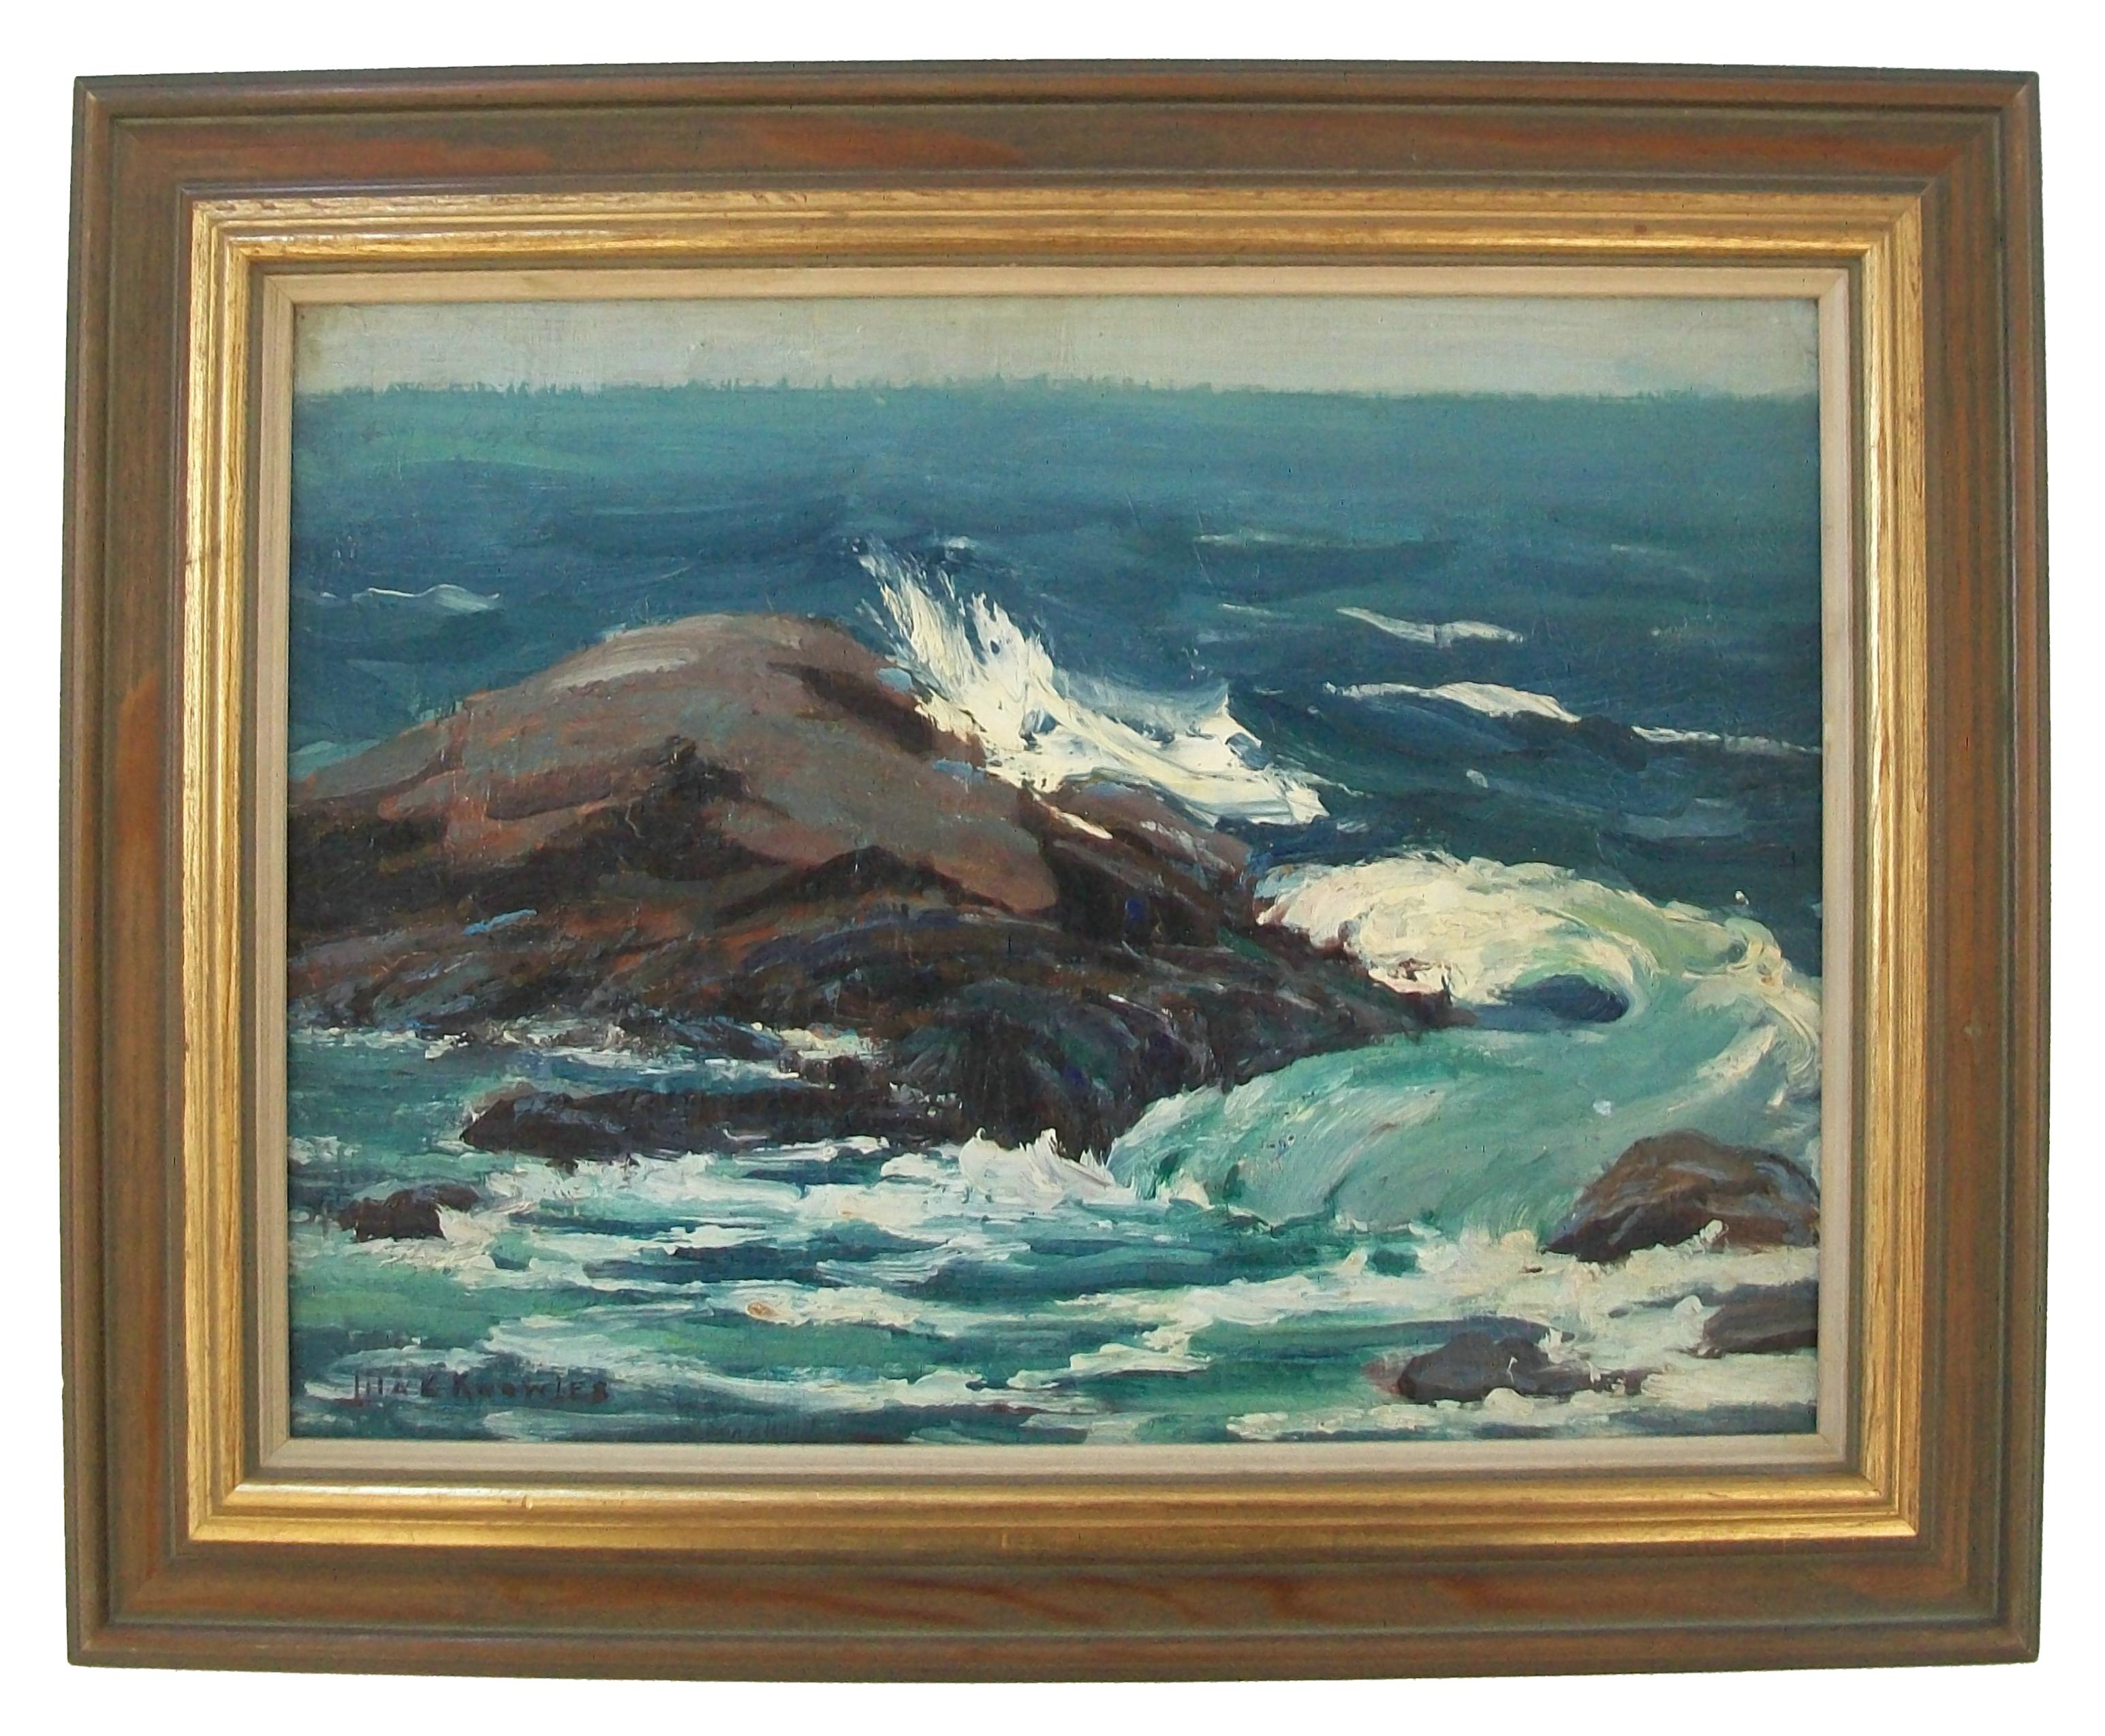 LILA CAROLINE MCGILLIVRAY KNOWLES (1886-1979) - 'The Sea' - Mid Century fine art seascape oil painting on canvas mounted to cardboard panel - featuring heavy impasto - signed lower left - Western Art League (London, Ontario) 1943 exhibition label